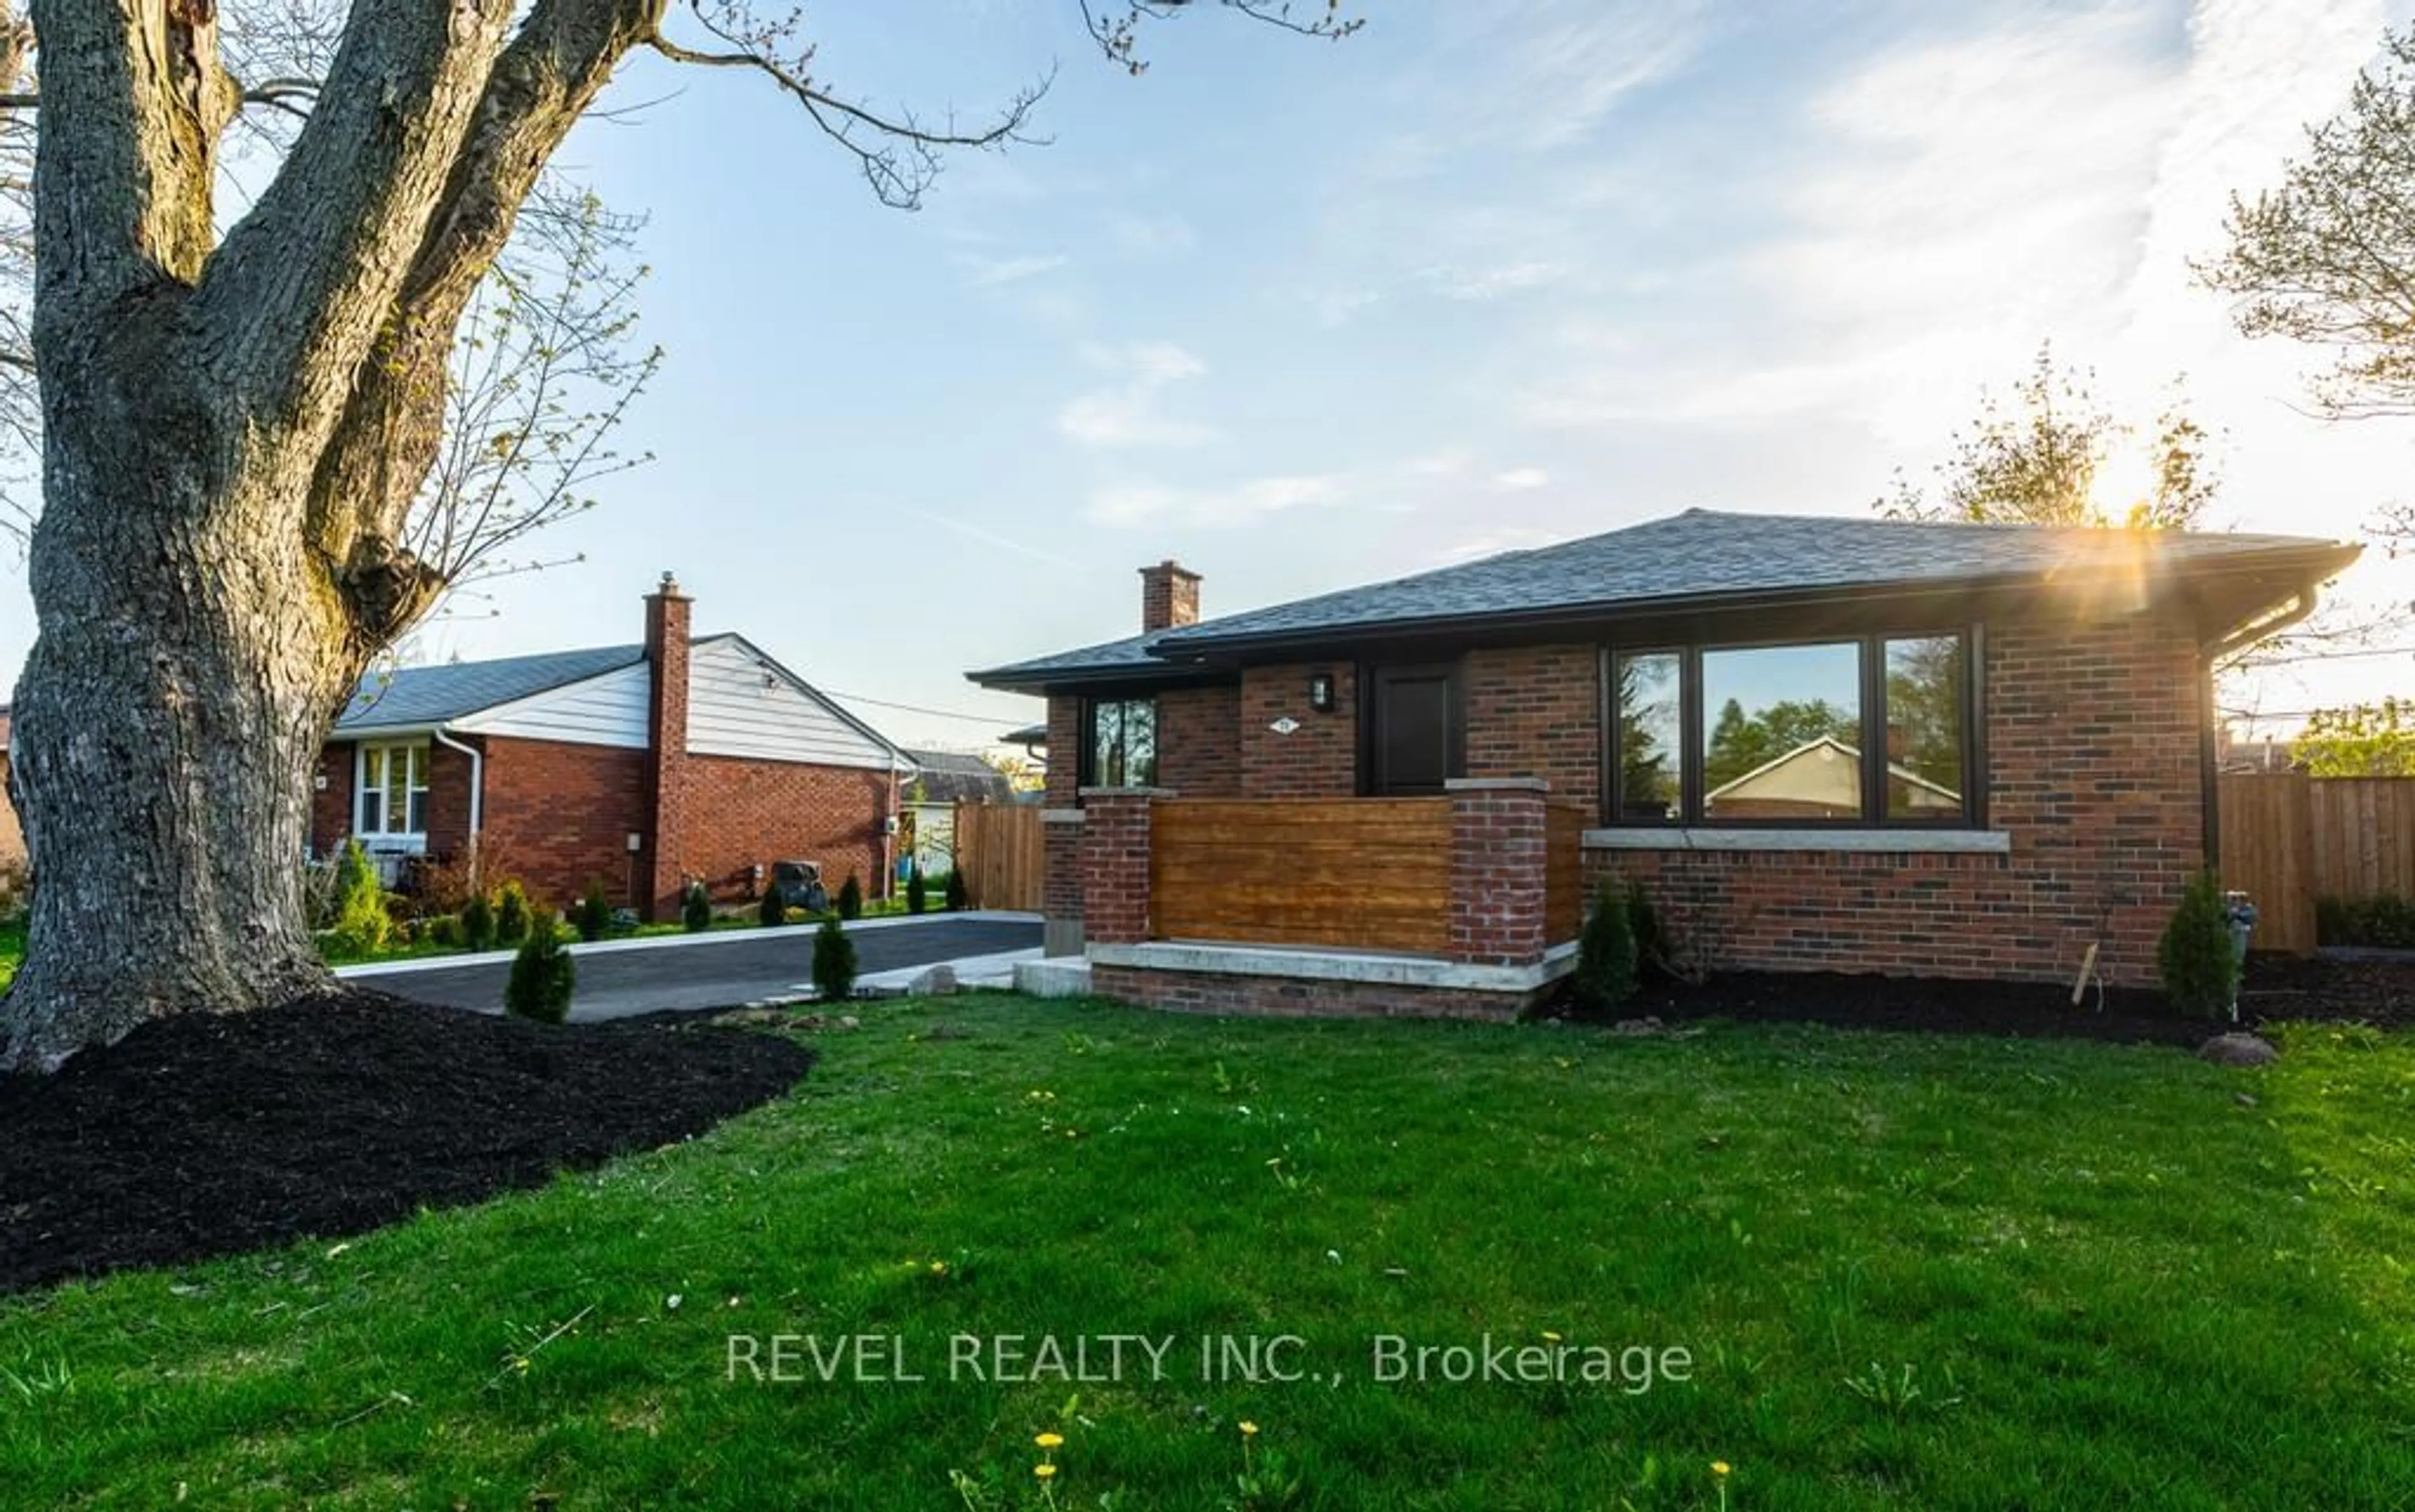 Home with brick exterior material for 71 Diffin Dr, Welland Ontario L3C 2K2